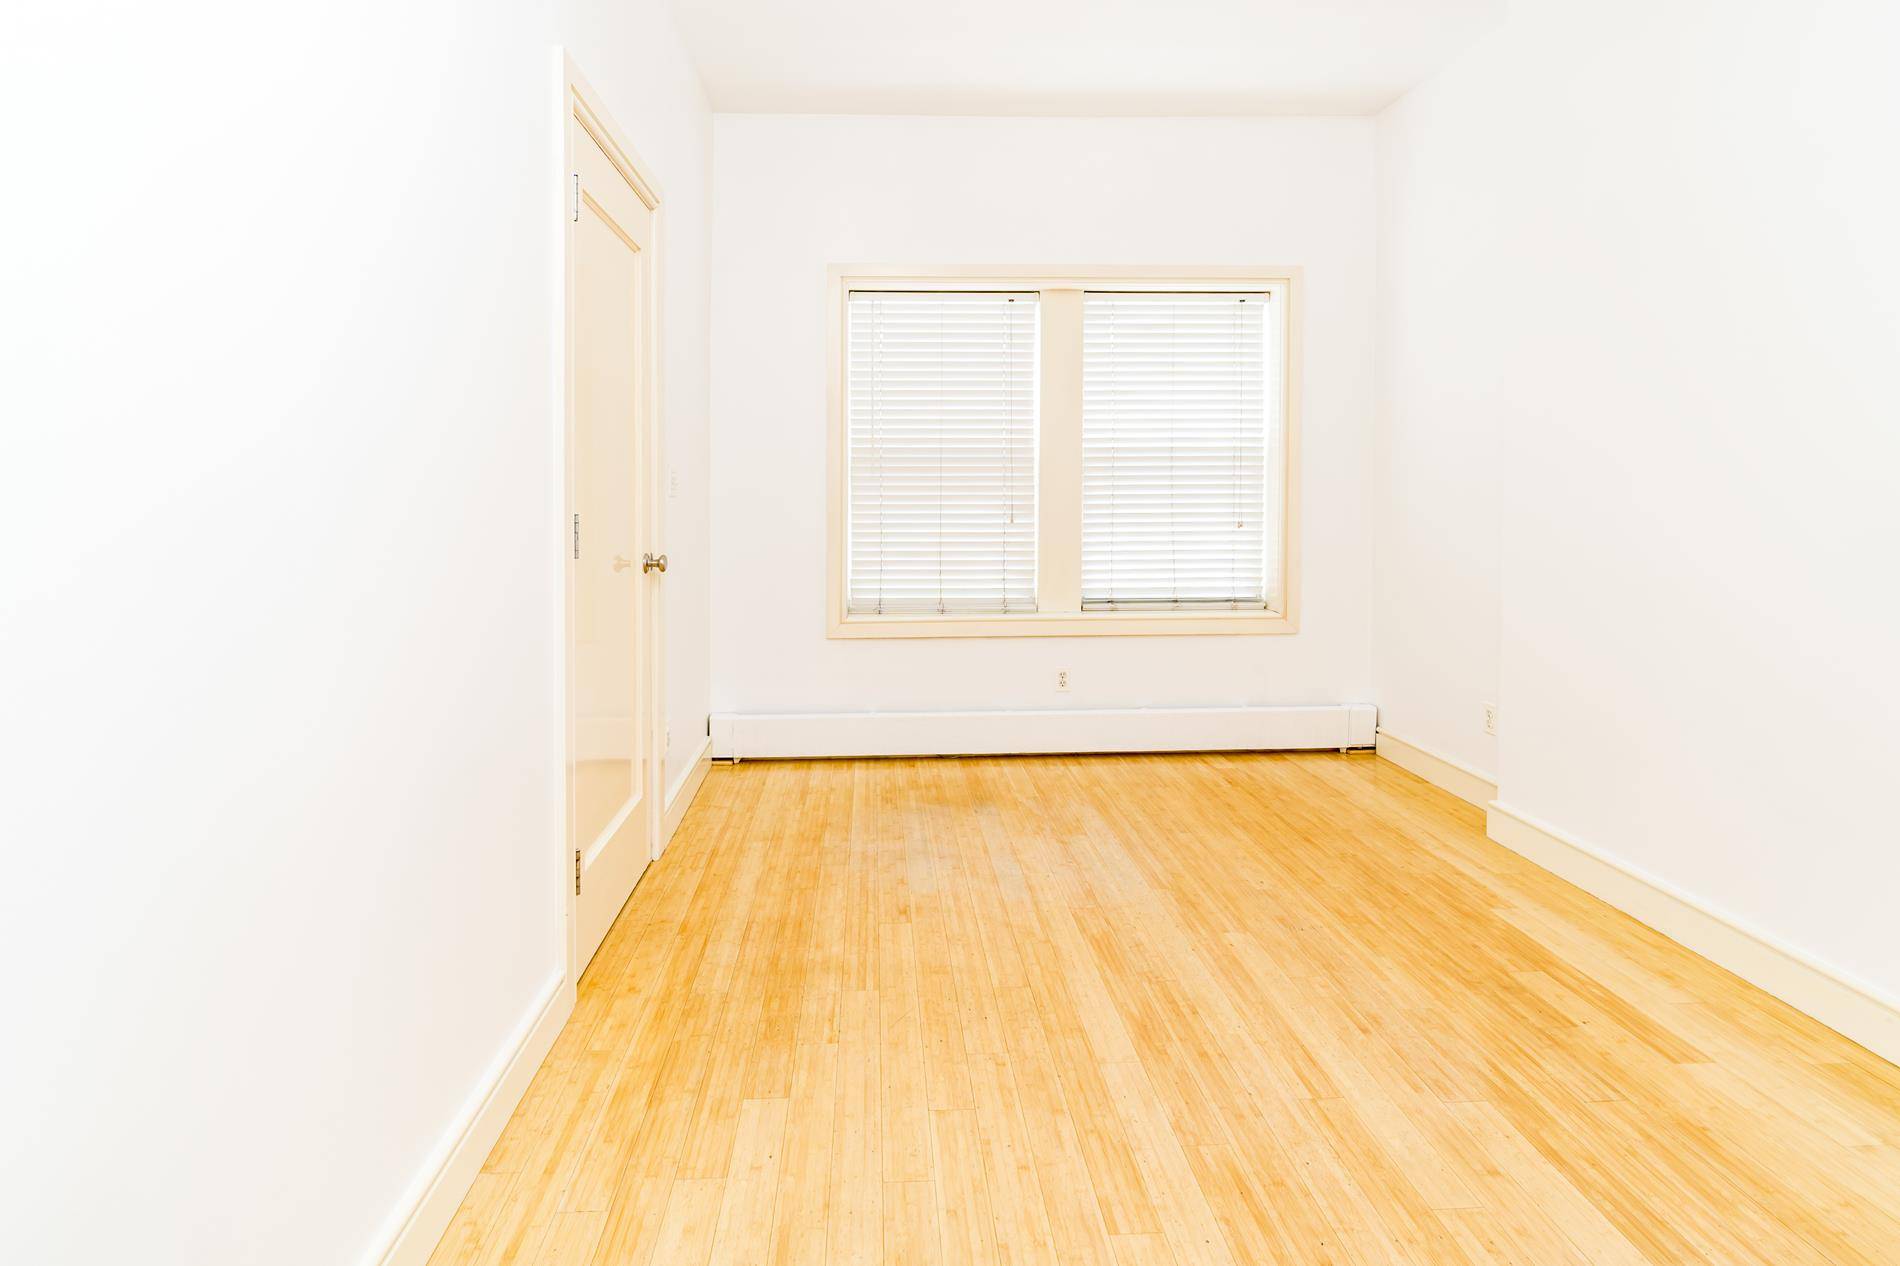 Long Island City Townhouse with Home OfficeSunny entire two floors, 1400 sq ft 850 sq ft garden.